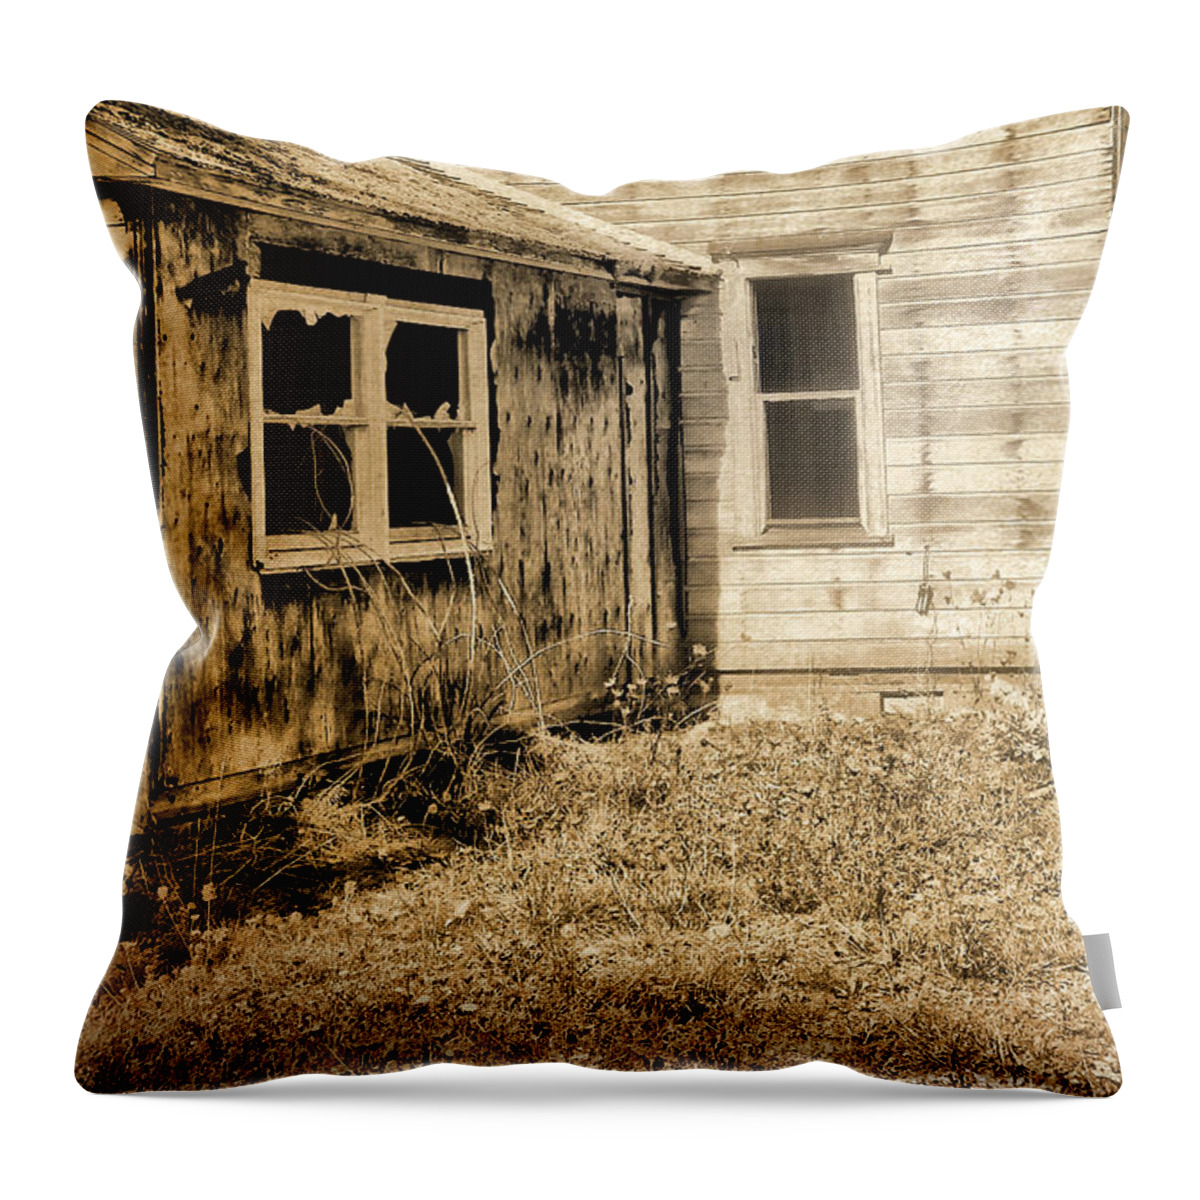 Abandoned House Throw Pillow featuring the photograph Abandoned House 3 by Bonnie Bruno